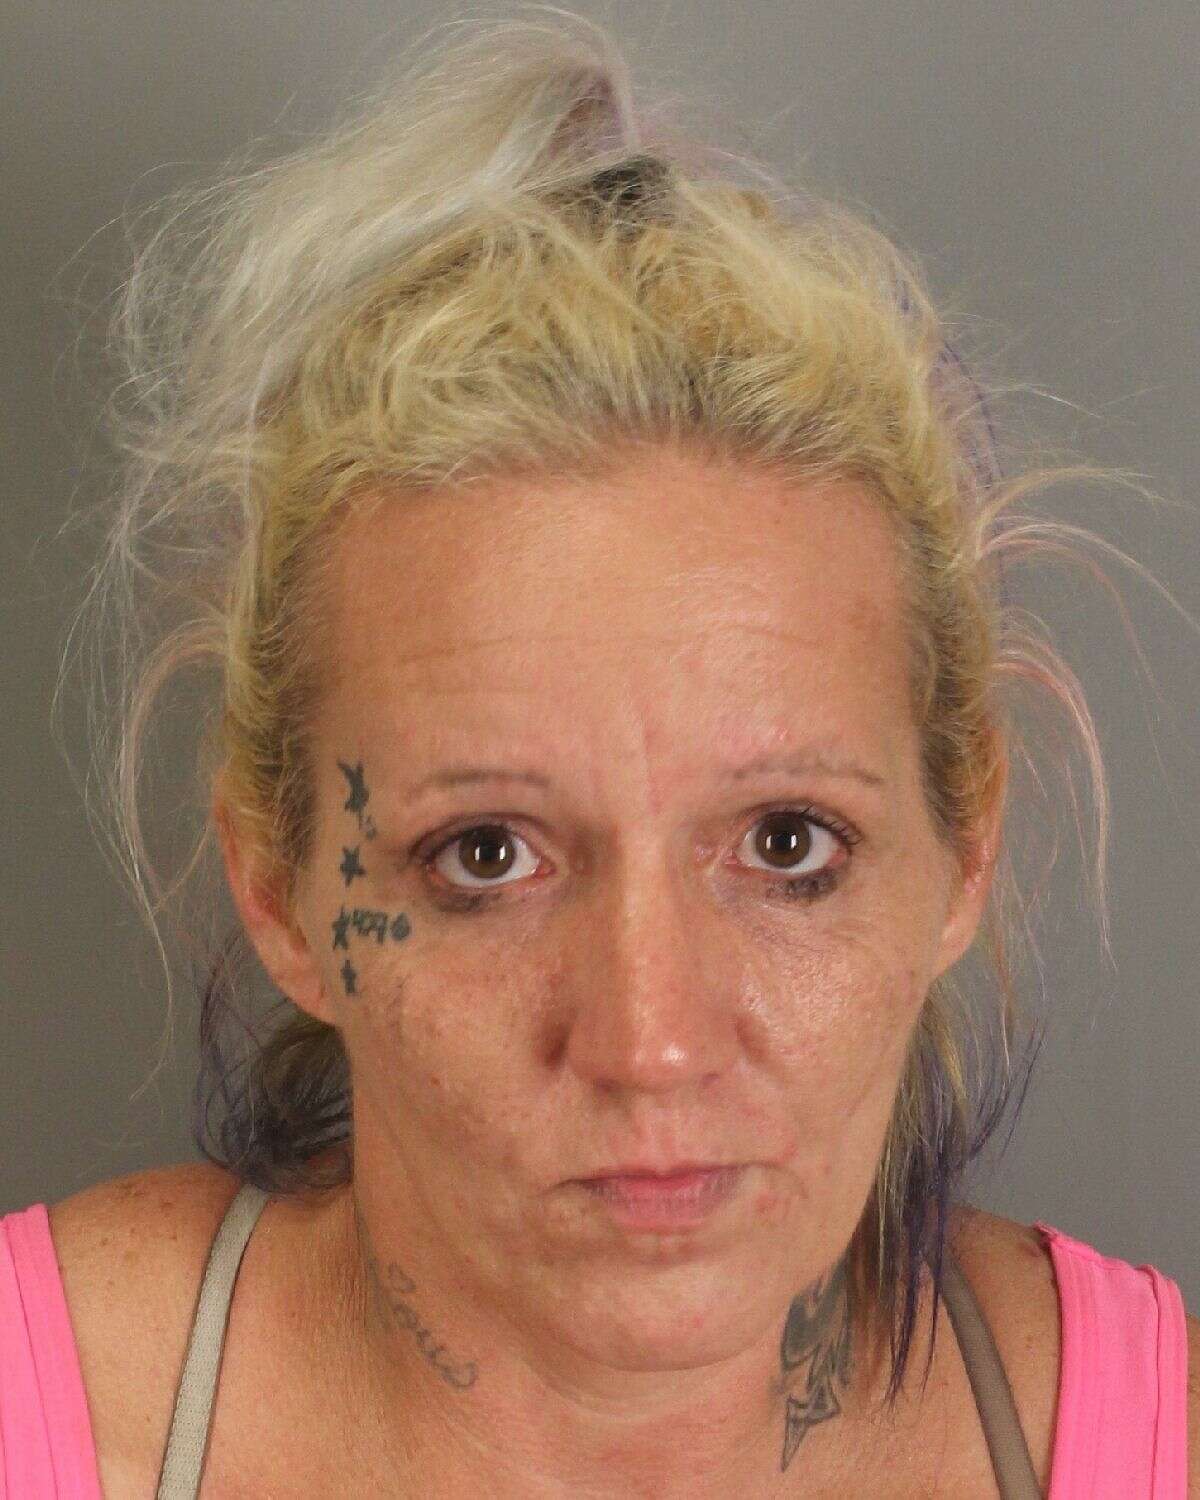 Precious White, 37, of Port Arthur was indicted in November. She is accused of stashing a container of drugs in her genitals in July. MORE.